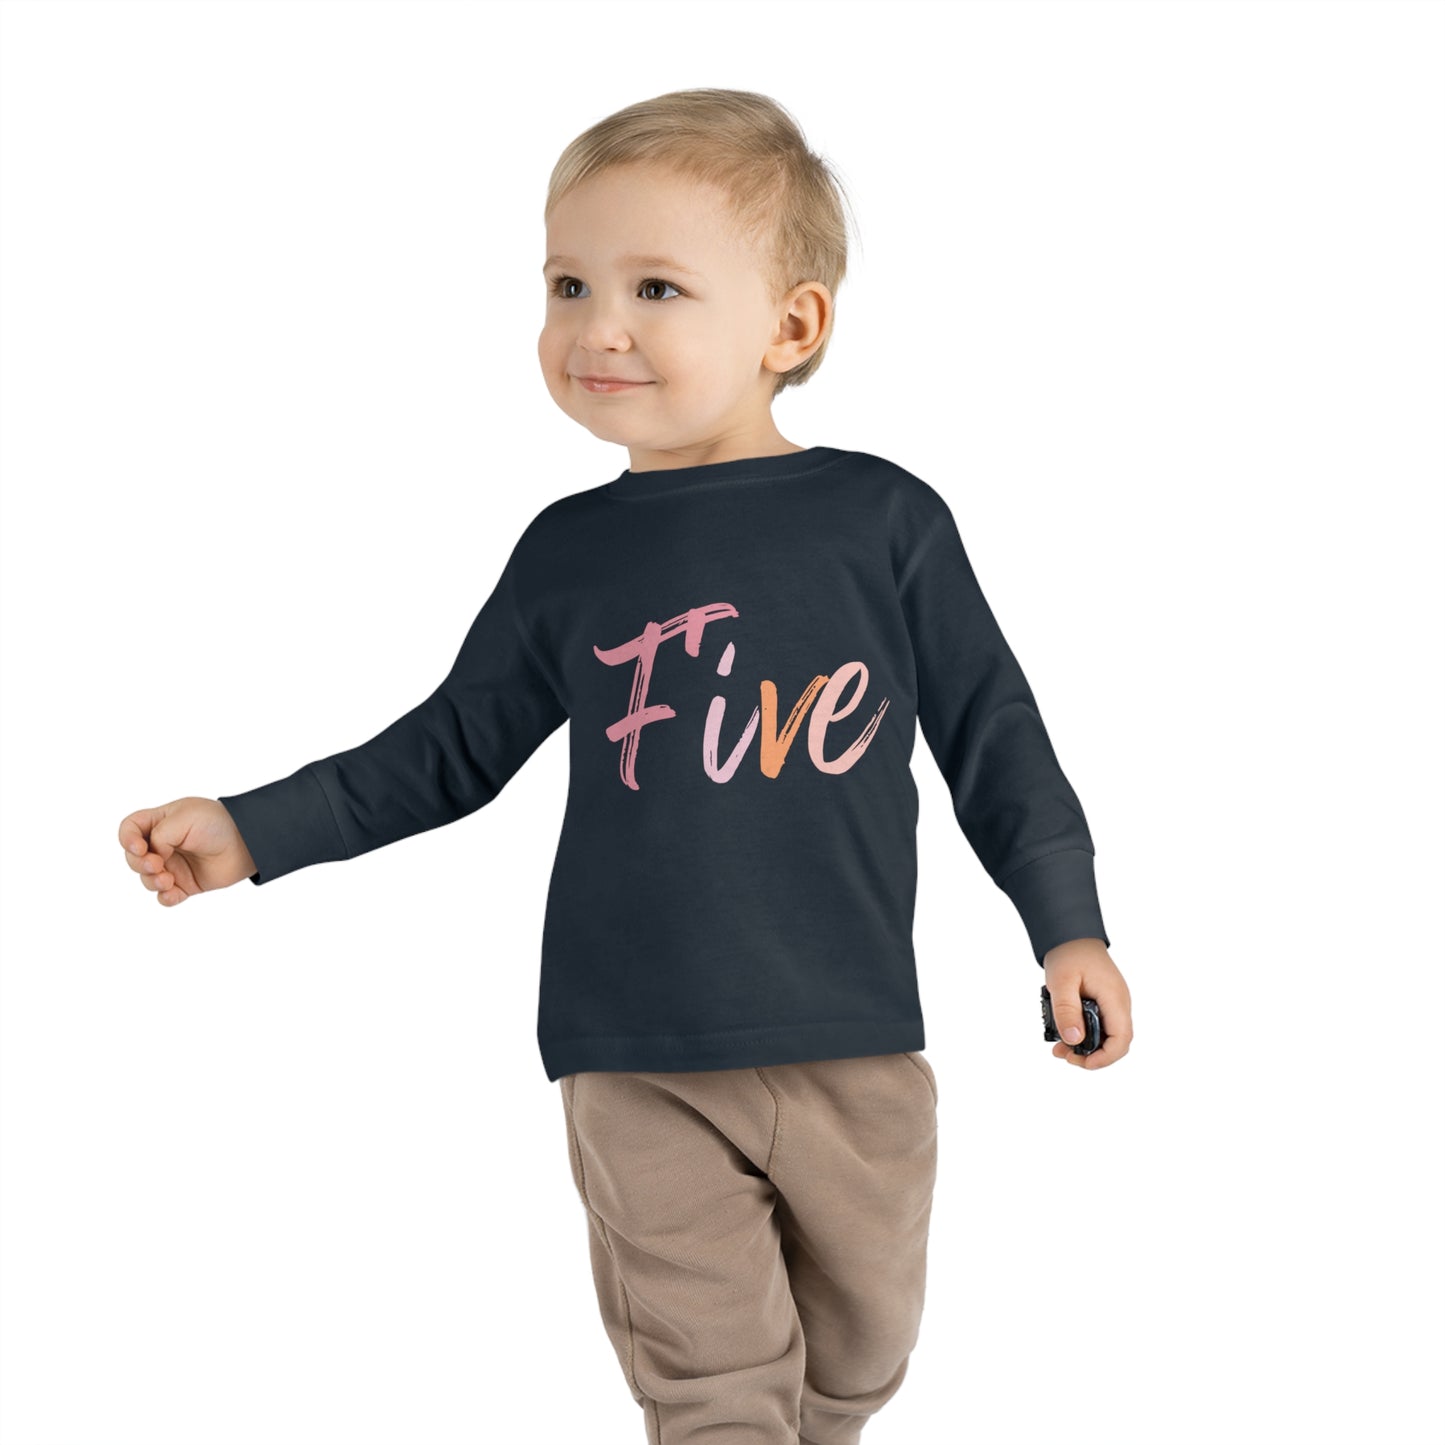 Long Sleeve Age Tee Shirt For 5 Year Old Unisex Kids